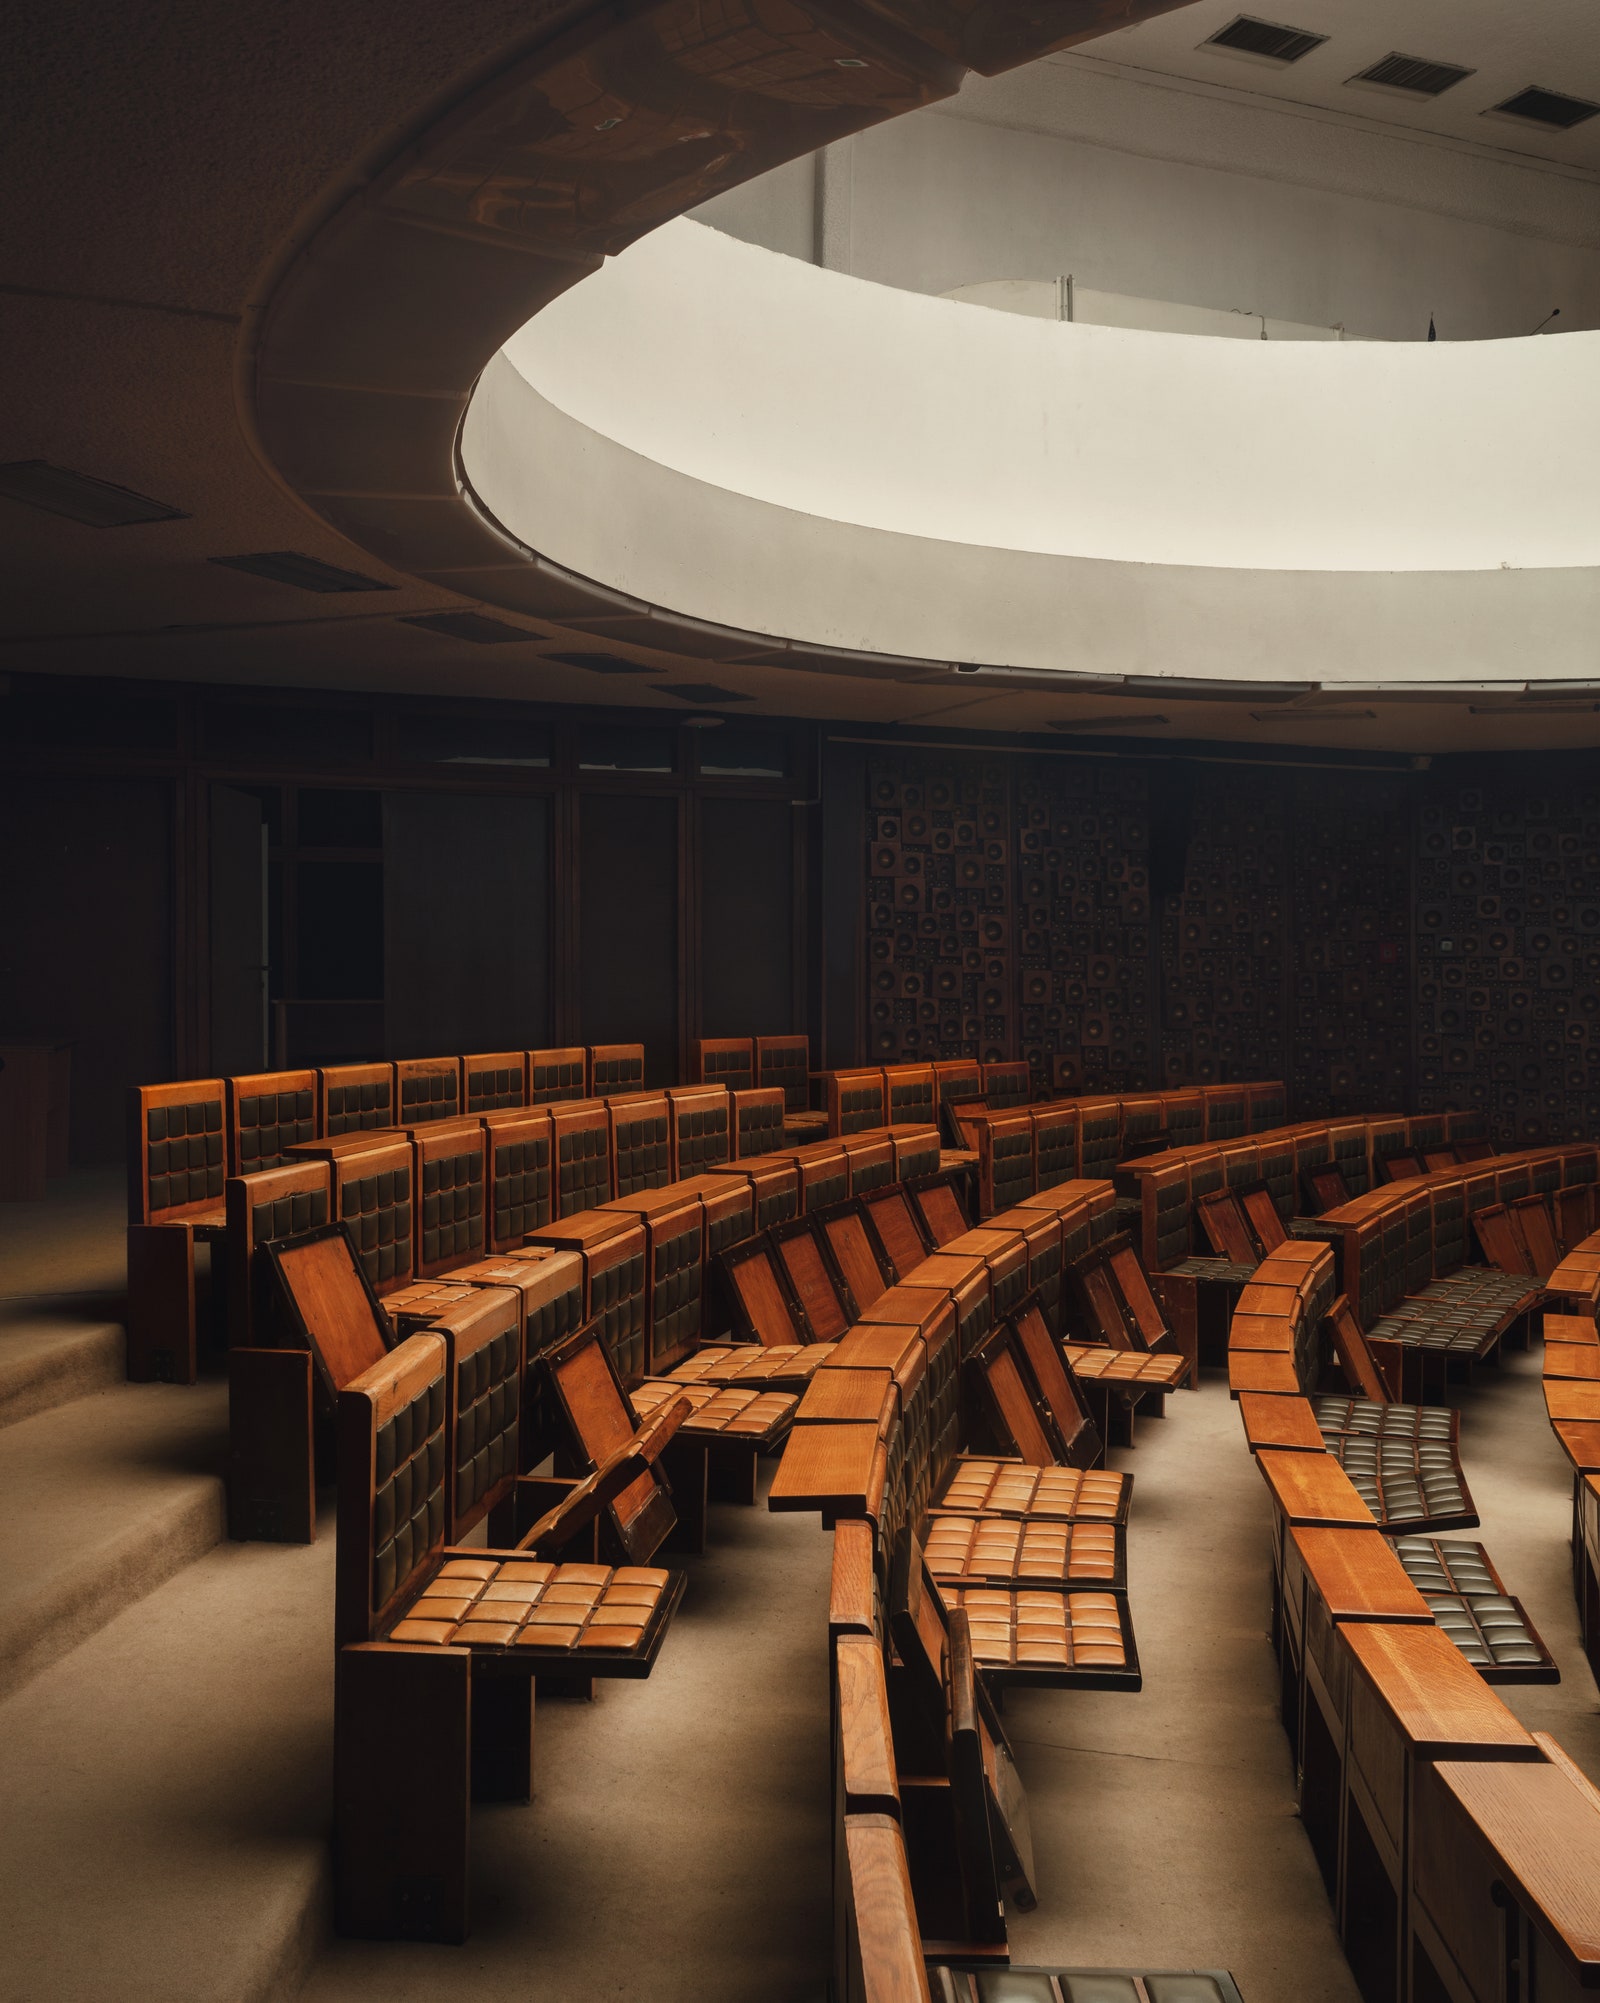 The main auditorium holds some 140 seats which like most of the other furniture and fixtures were manufactured at the...